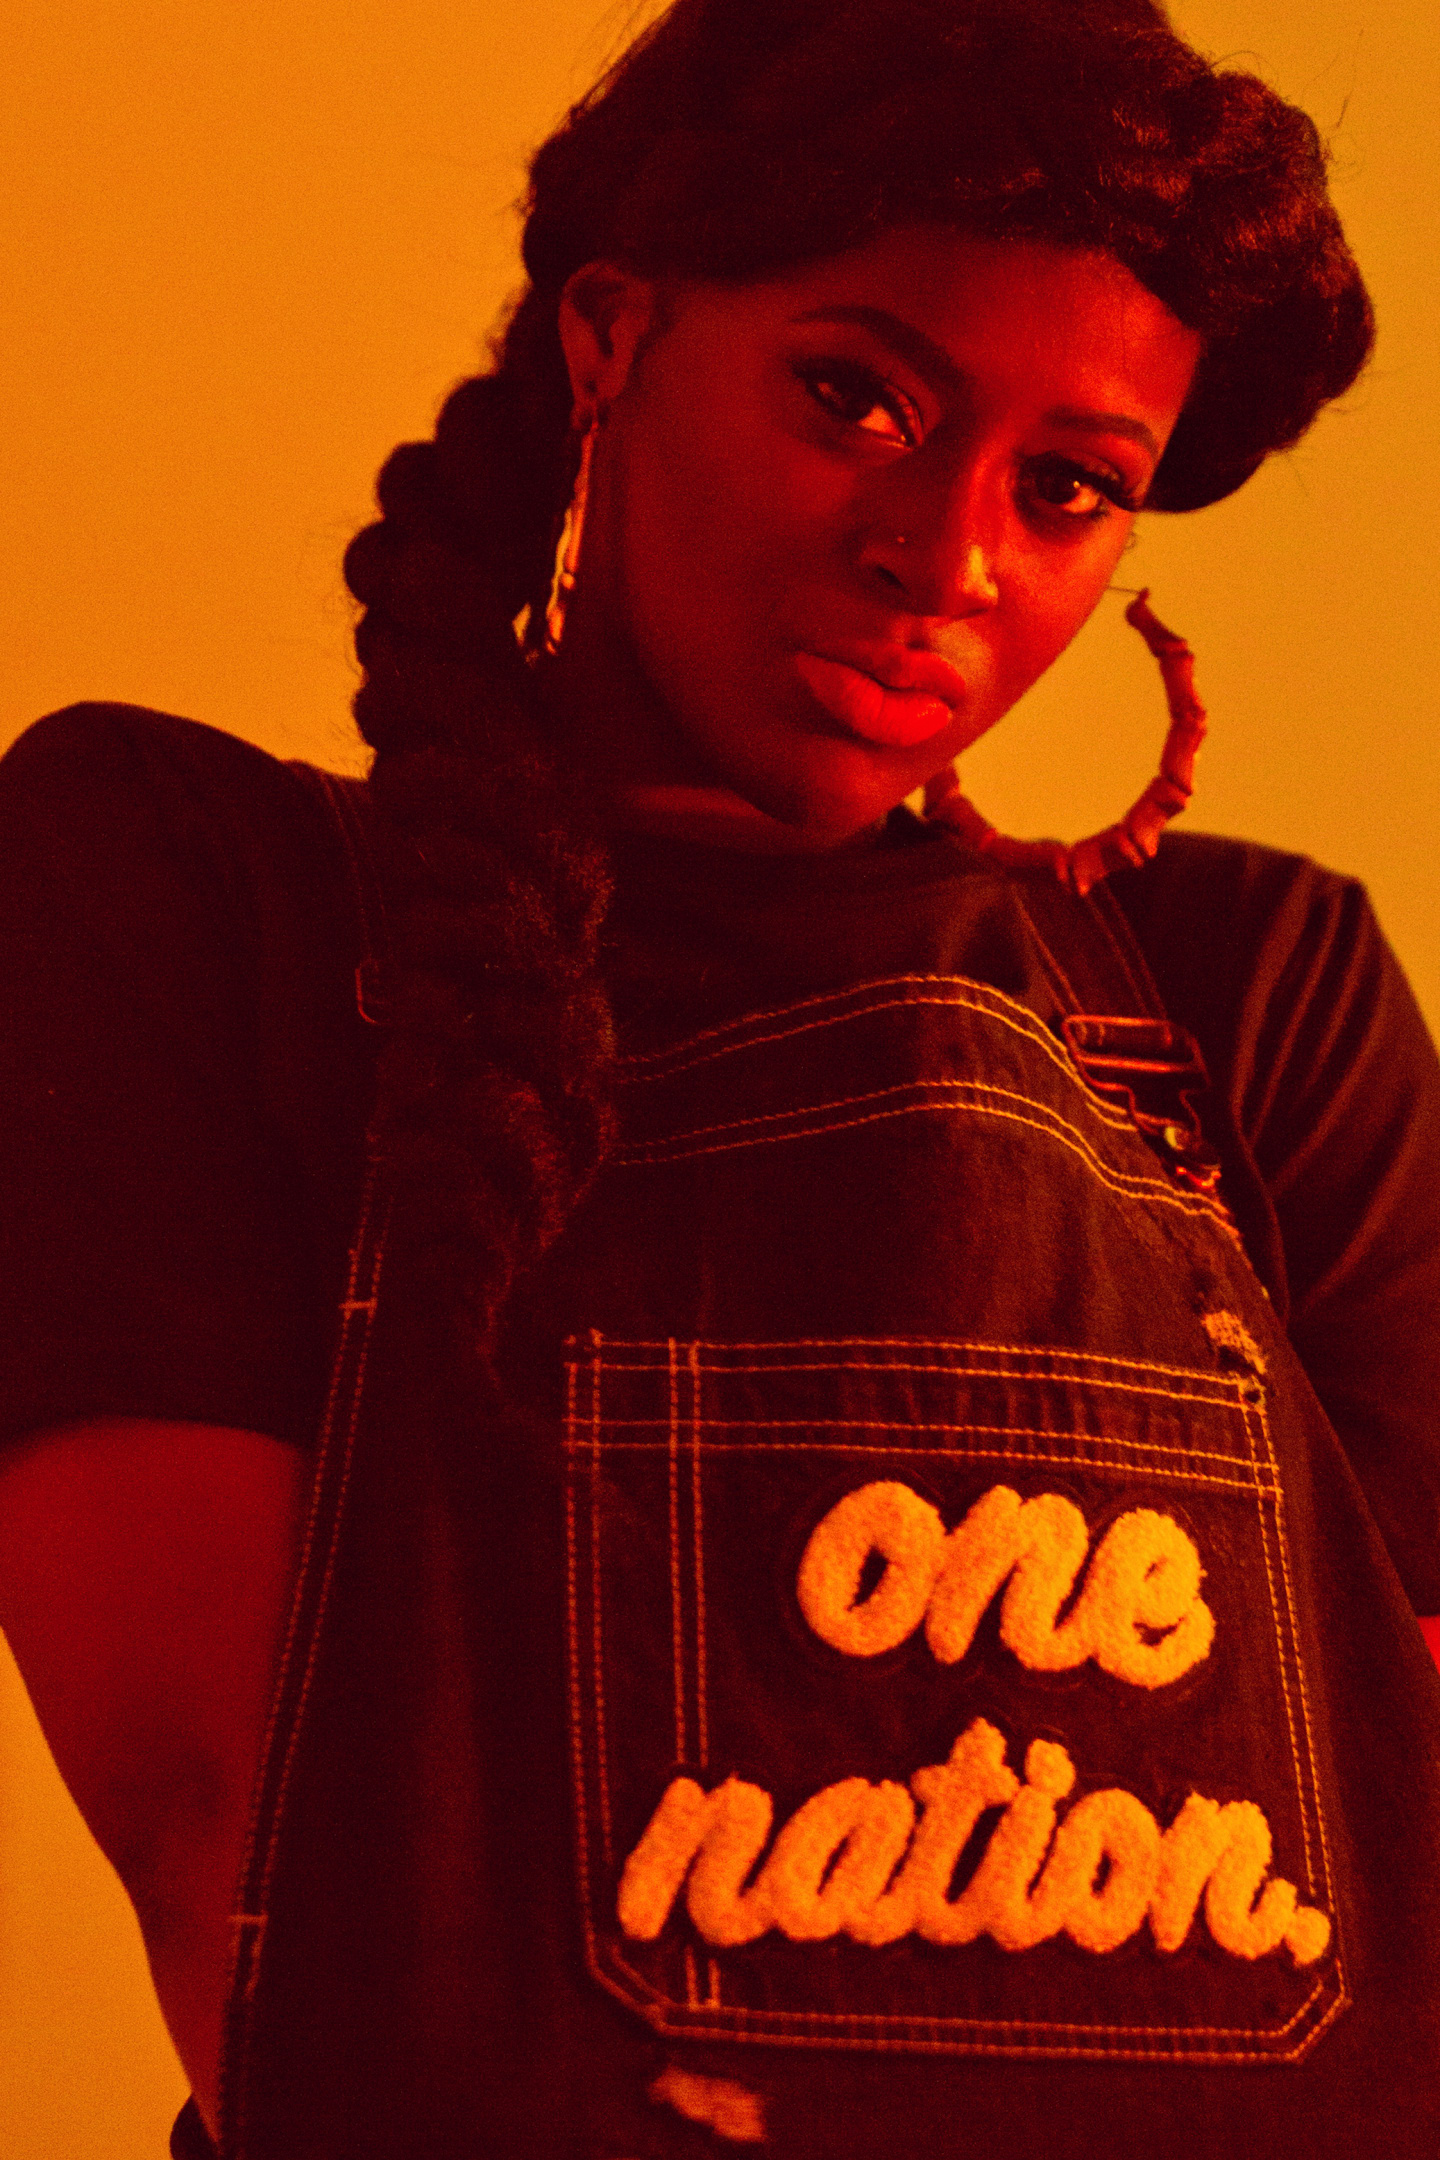 Tierra Whack is building her own world